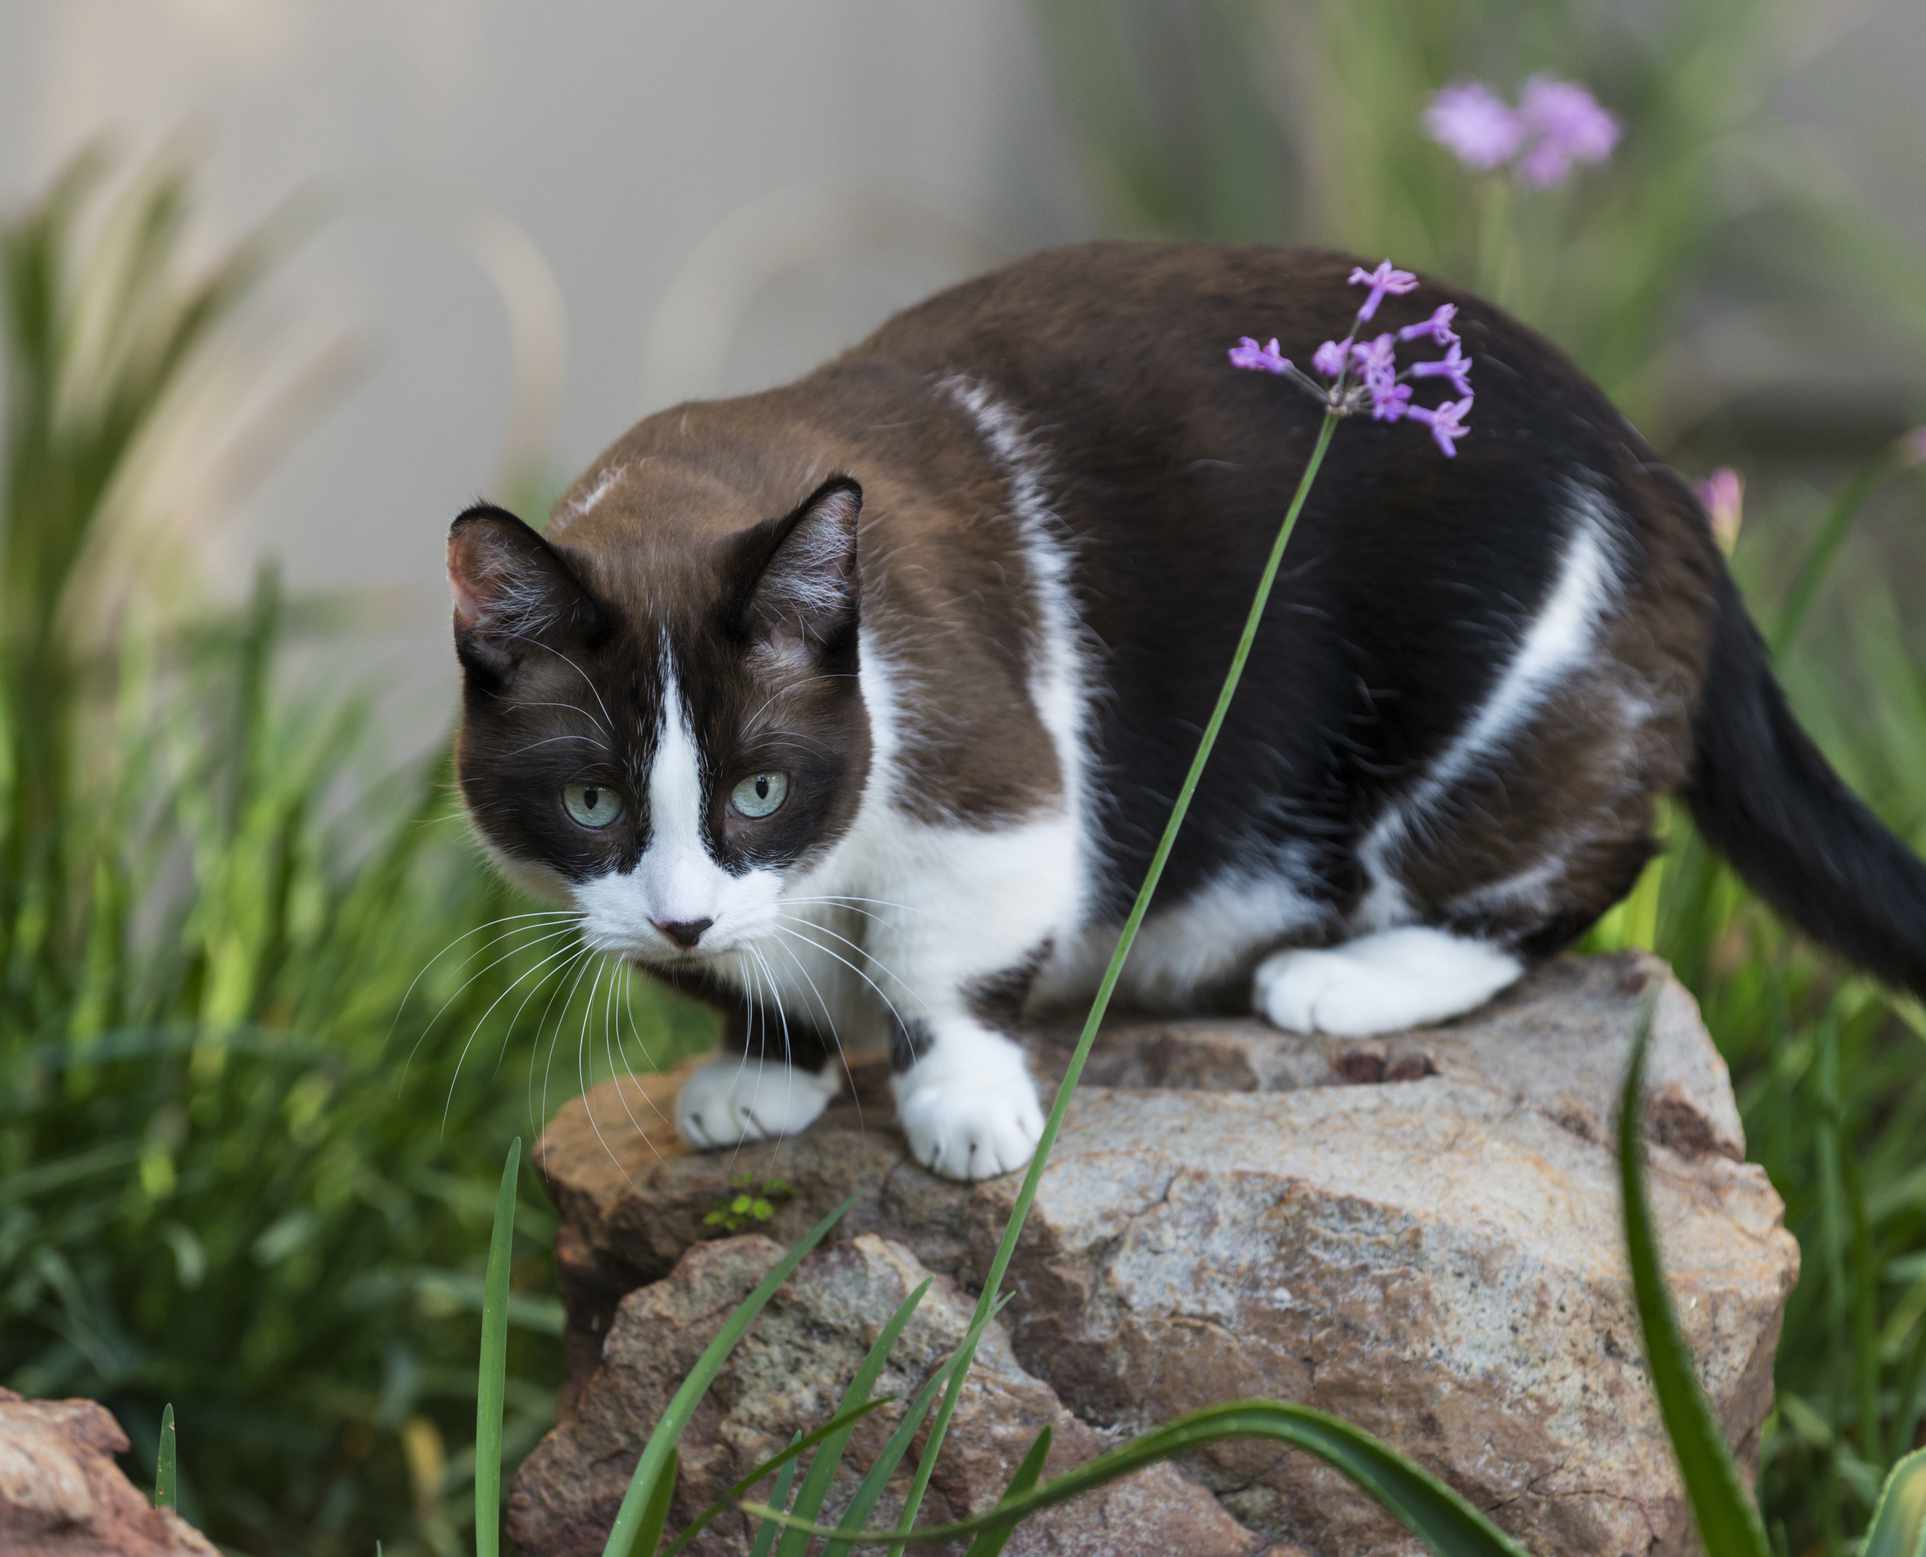 Black and white Munchkin cat on a rock in a garden